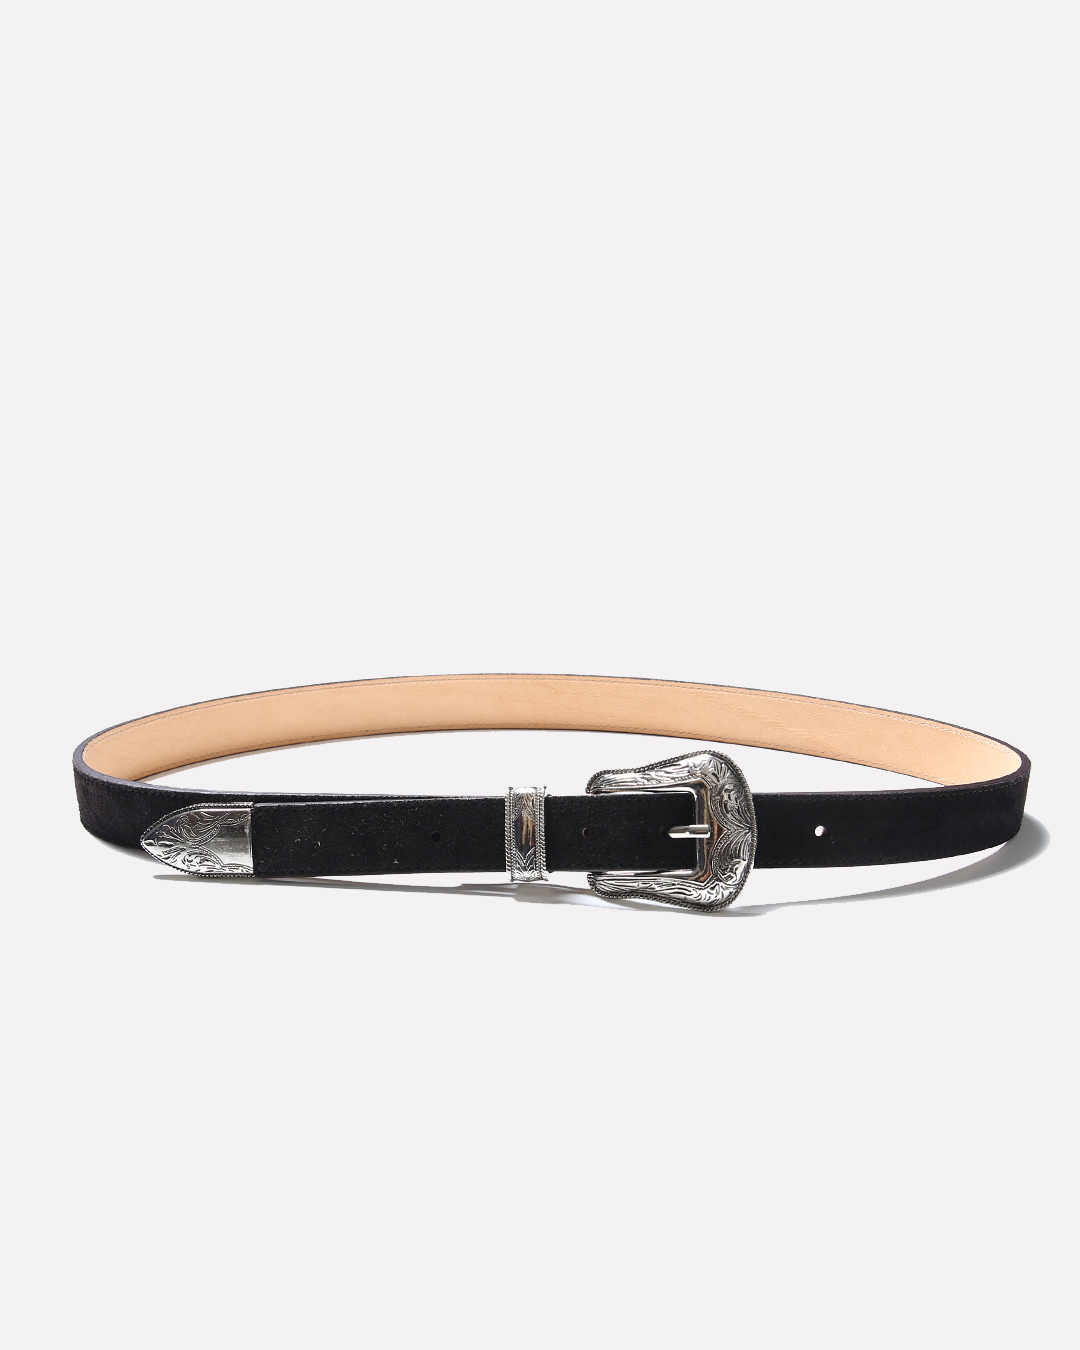 Iconic Western Belt (Suede Brown)